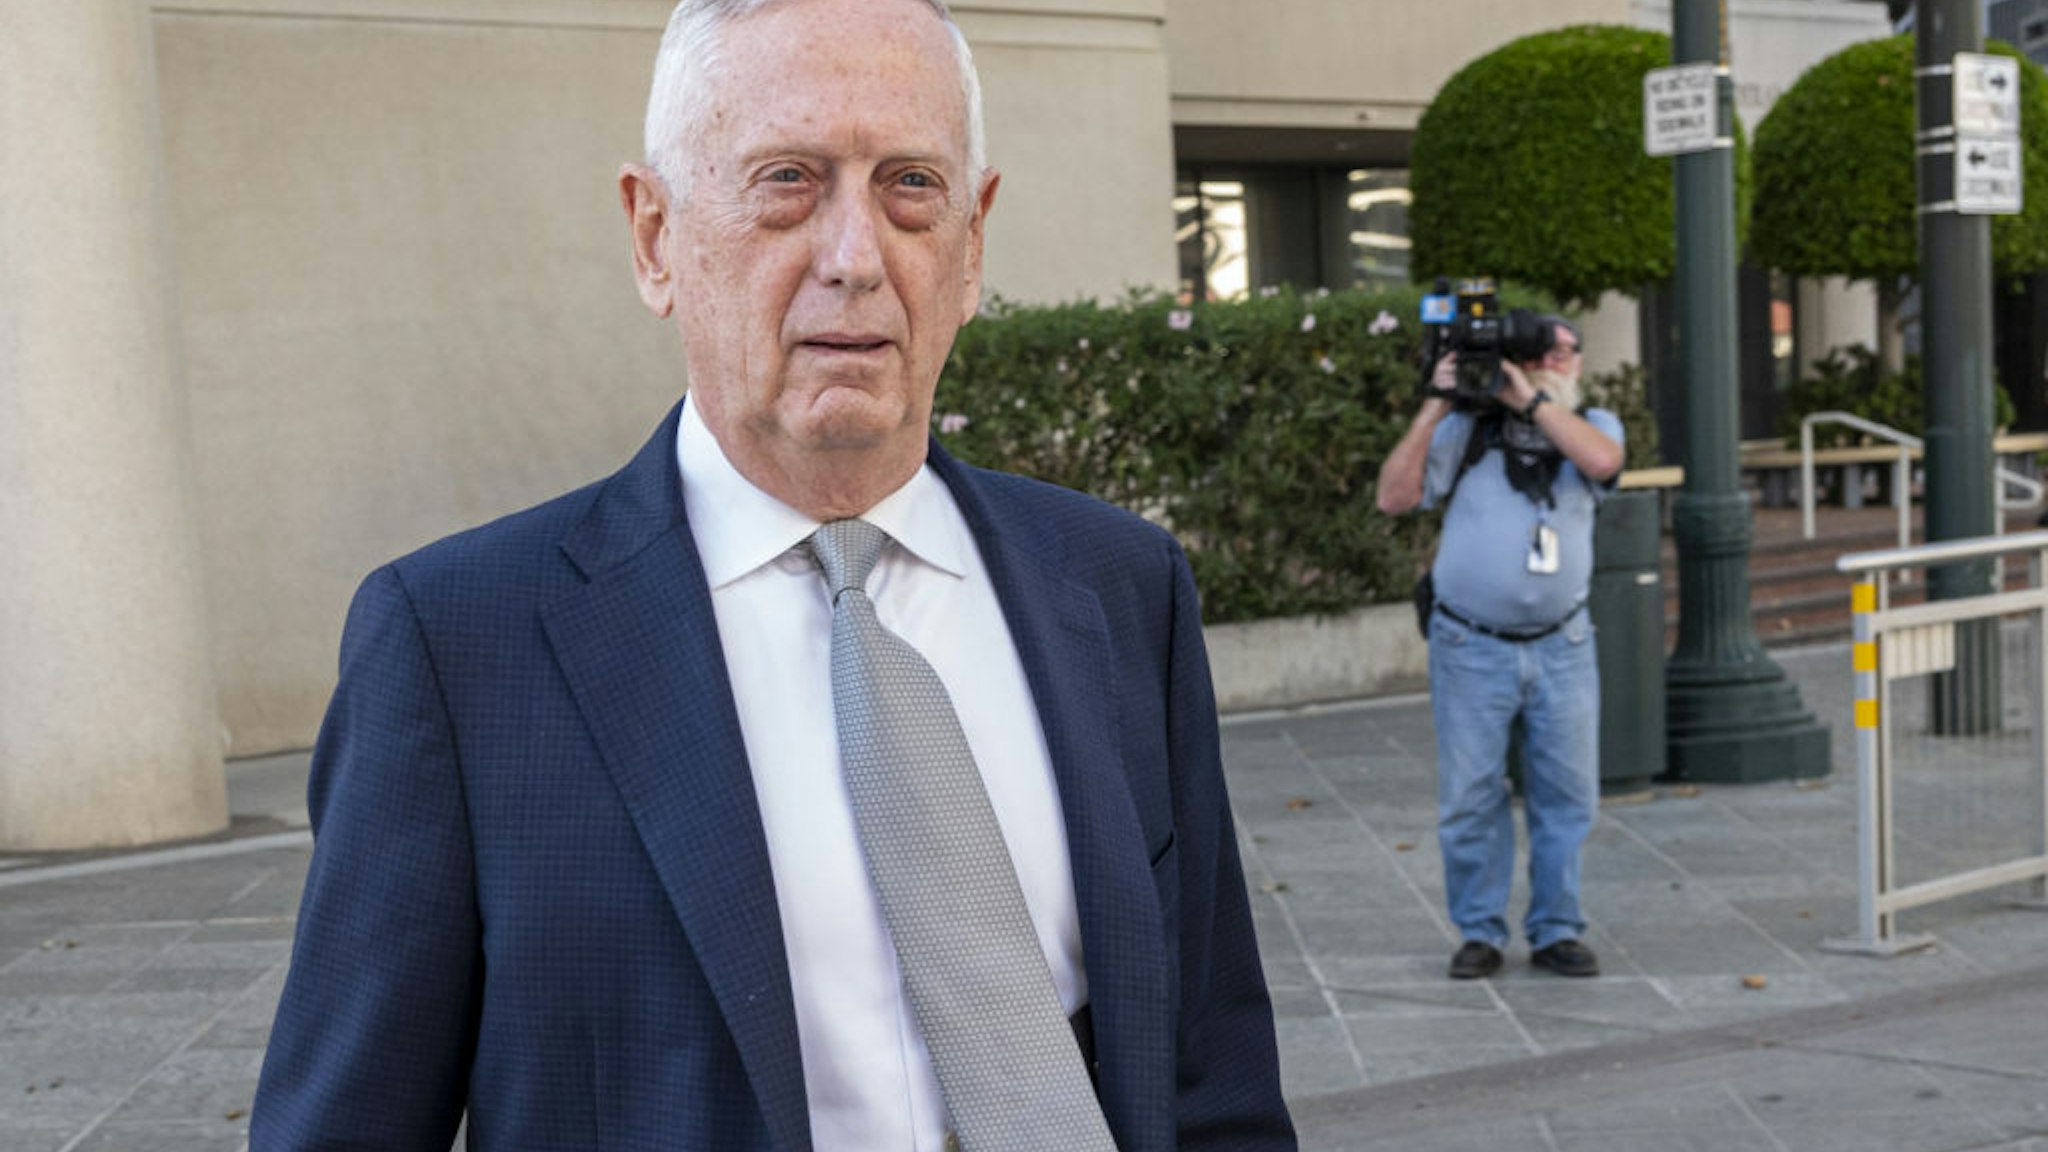 James Mattis, former U.S. secretary of defense, leaves federal court in San Jose, California, U.S., on Wednesday, Sept. 22, 2021. Mattis said he believed in Theranos Inc. founder Elizabeth Holmes so much that he not only became a board member but also invested a significant amount of his own money into the company before it failed. Photographer: David Paul Morris/Bloomberg via Getty Images